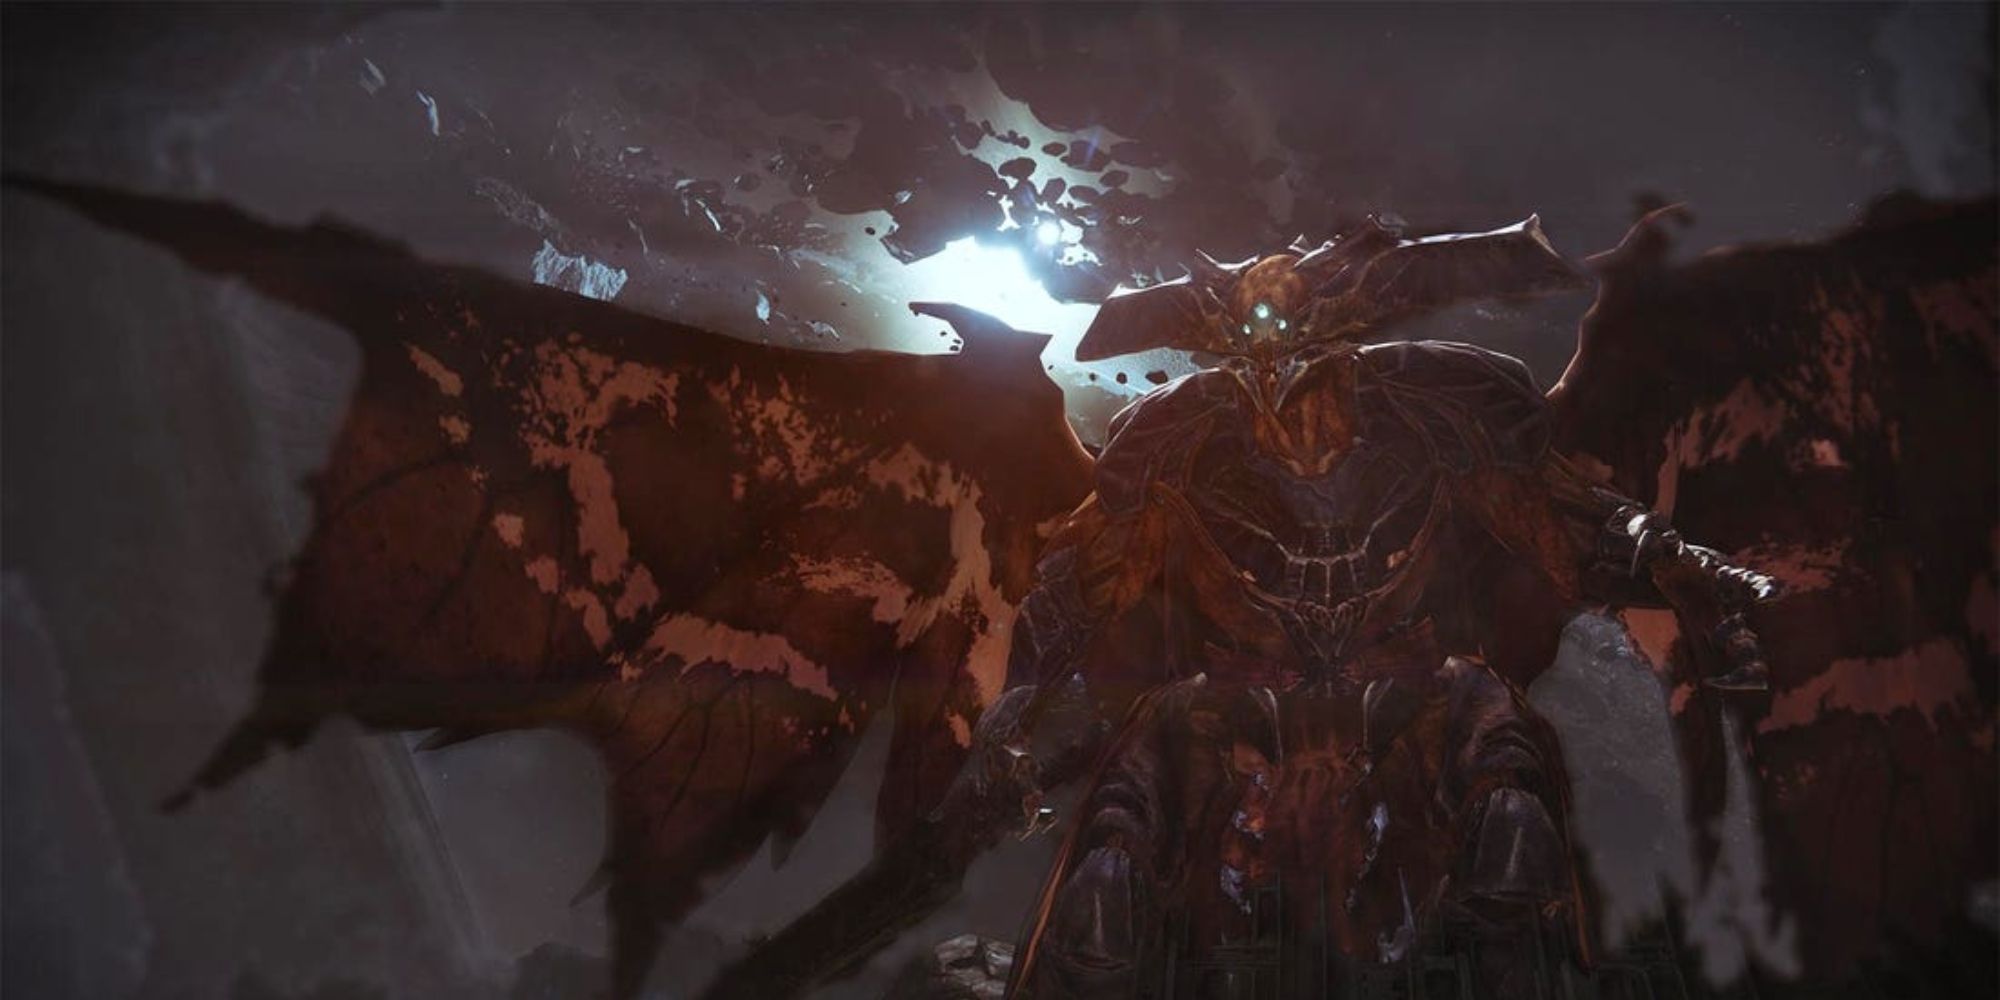 Destiny wide shot of Oryx standing with sword in left hand and wings spread out against a backdrop of broken astroids